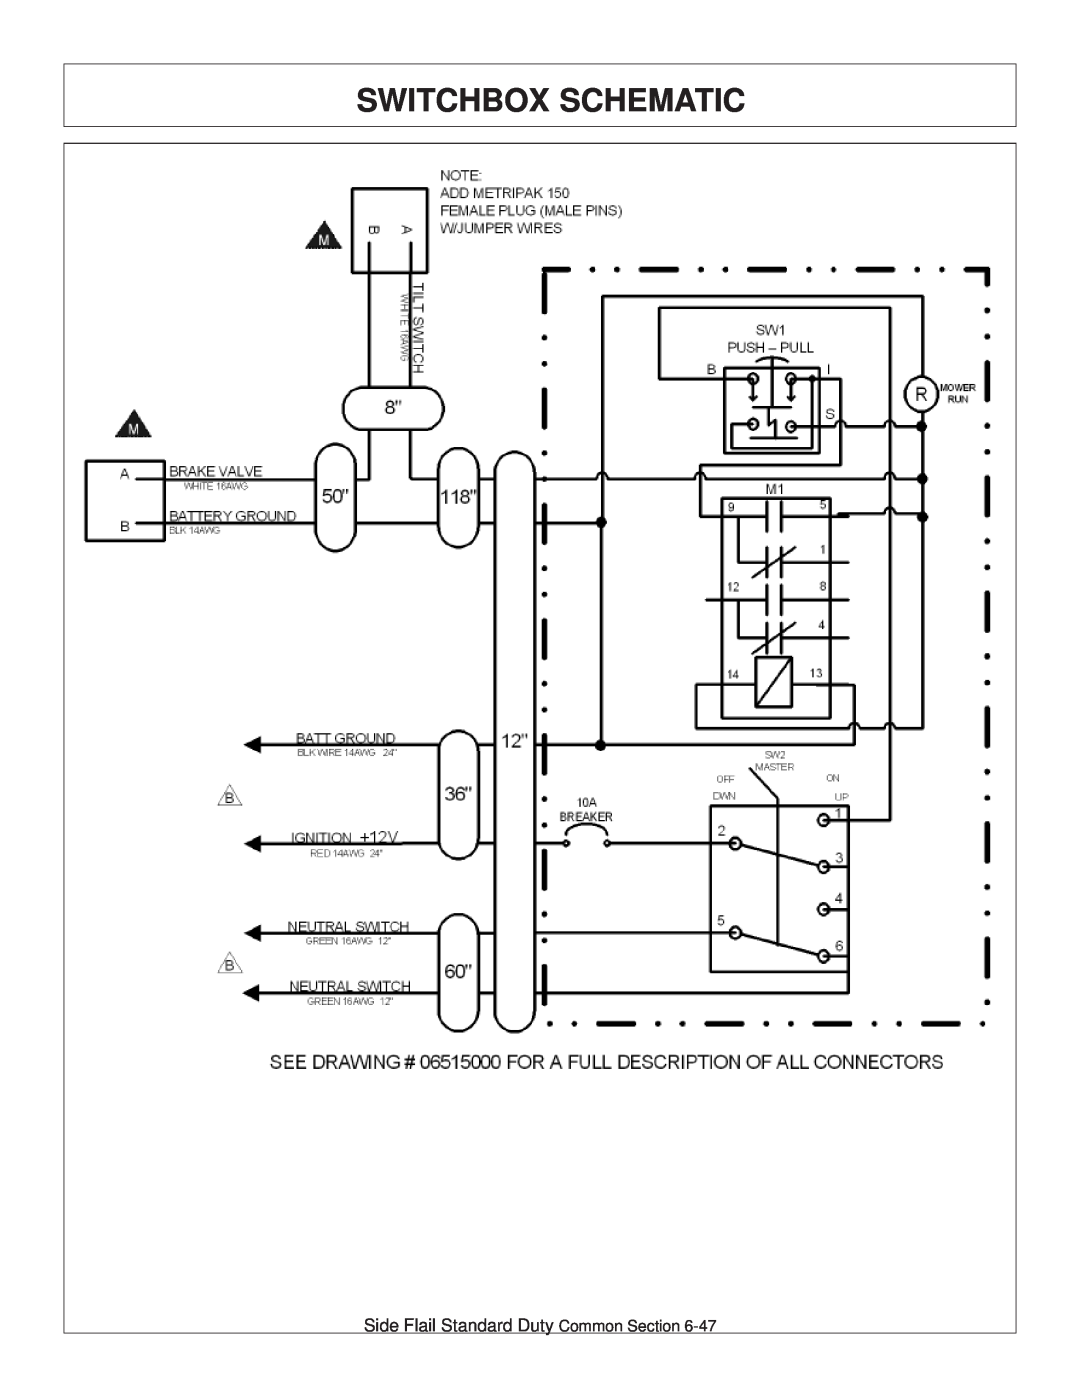 Tiger JD 5101E, JD 5083E, JD 5093E manual Switchbox Schematic, Side Flail Standard Duty Common Section 